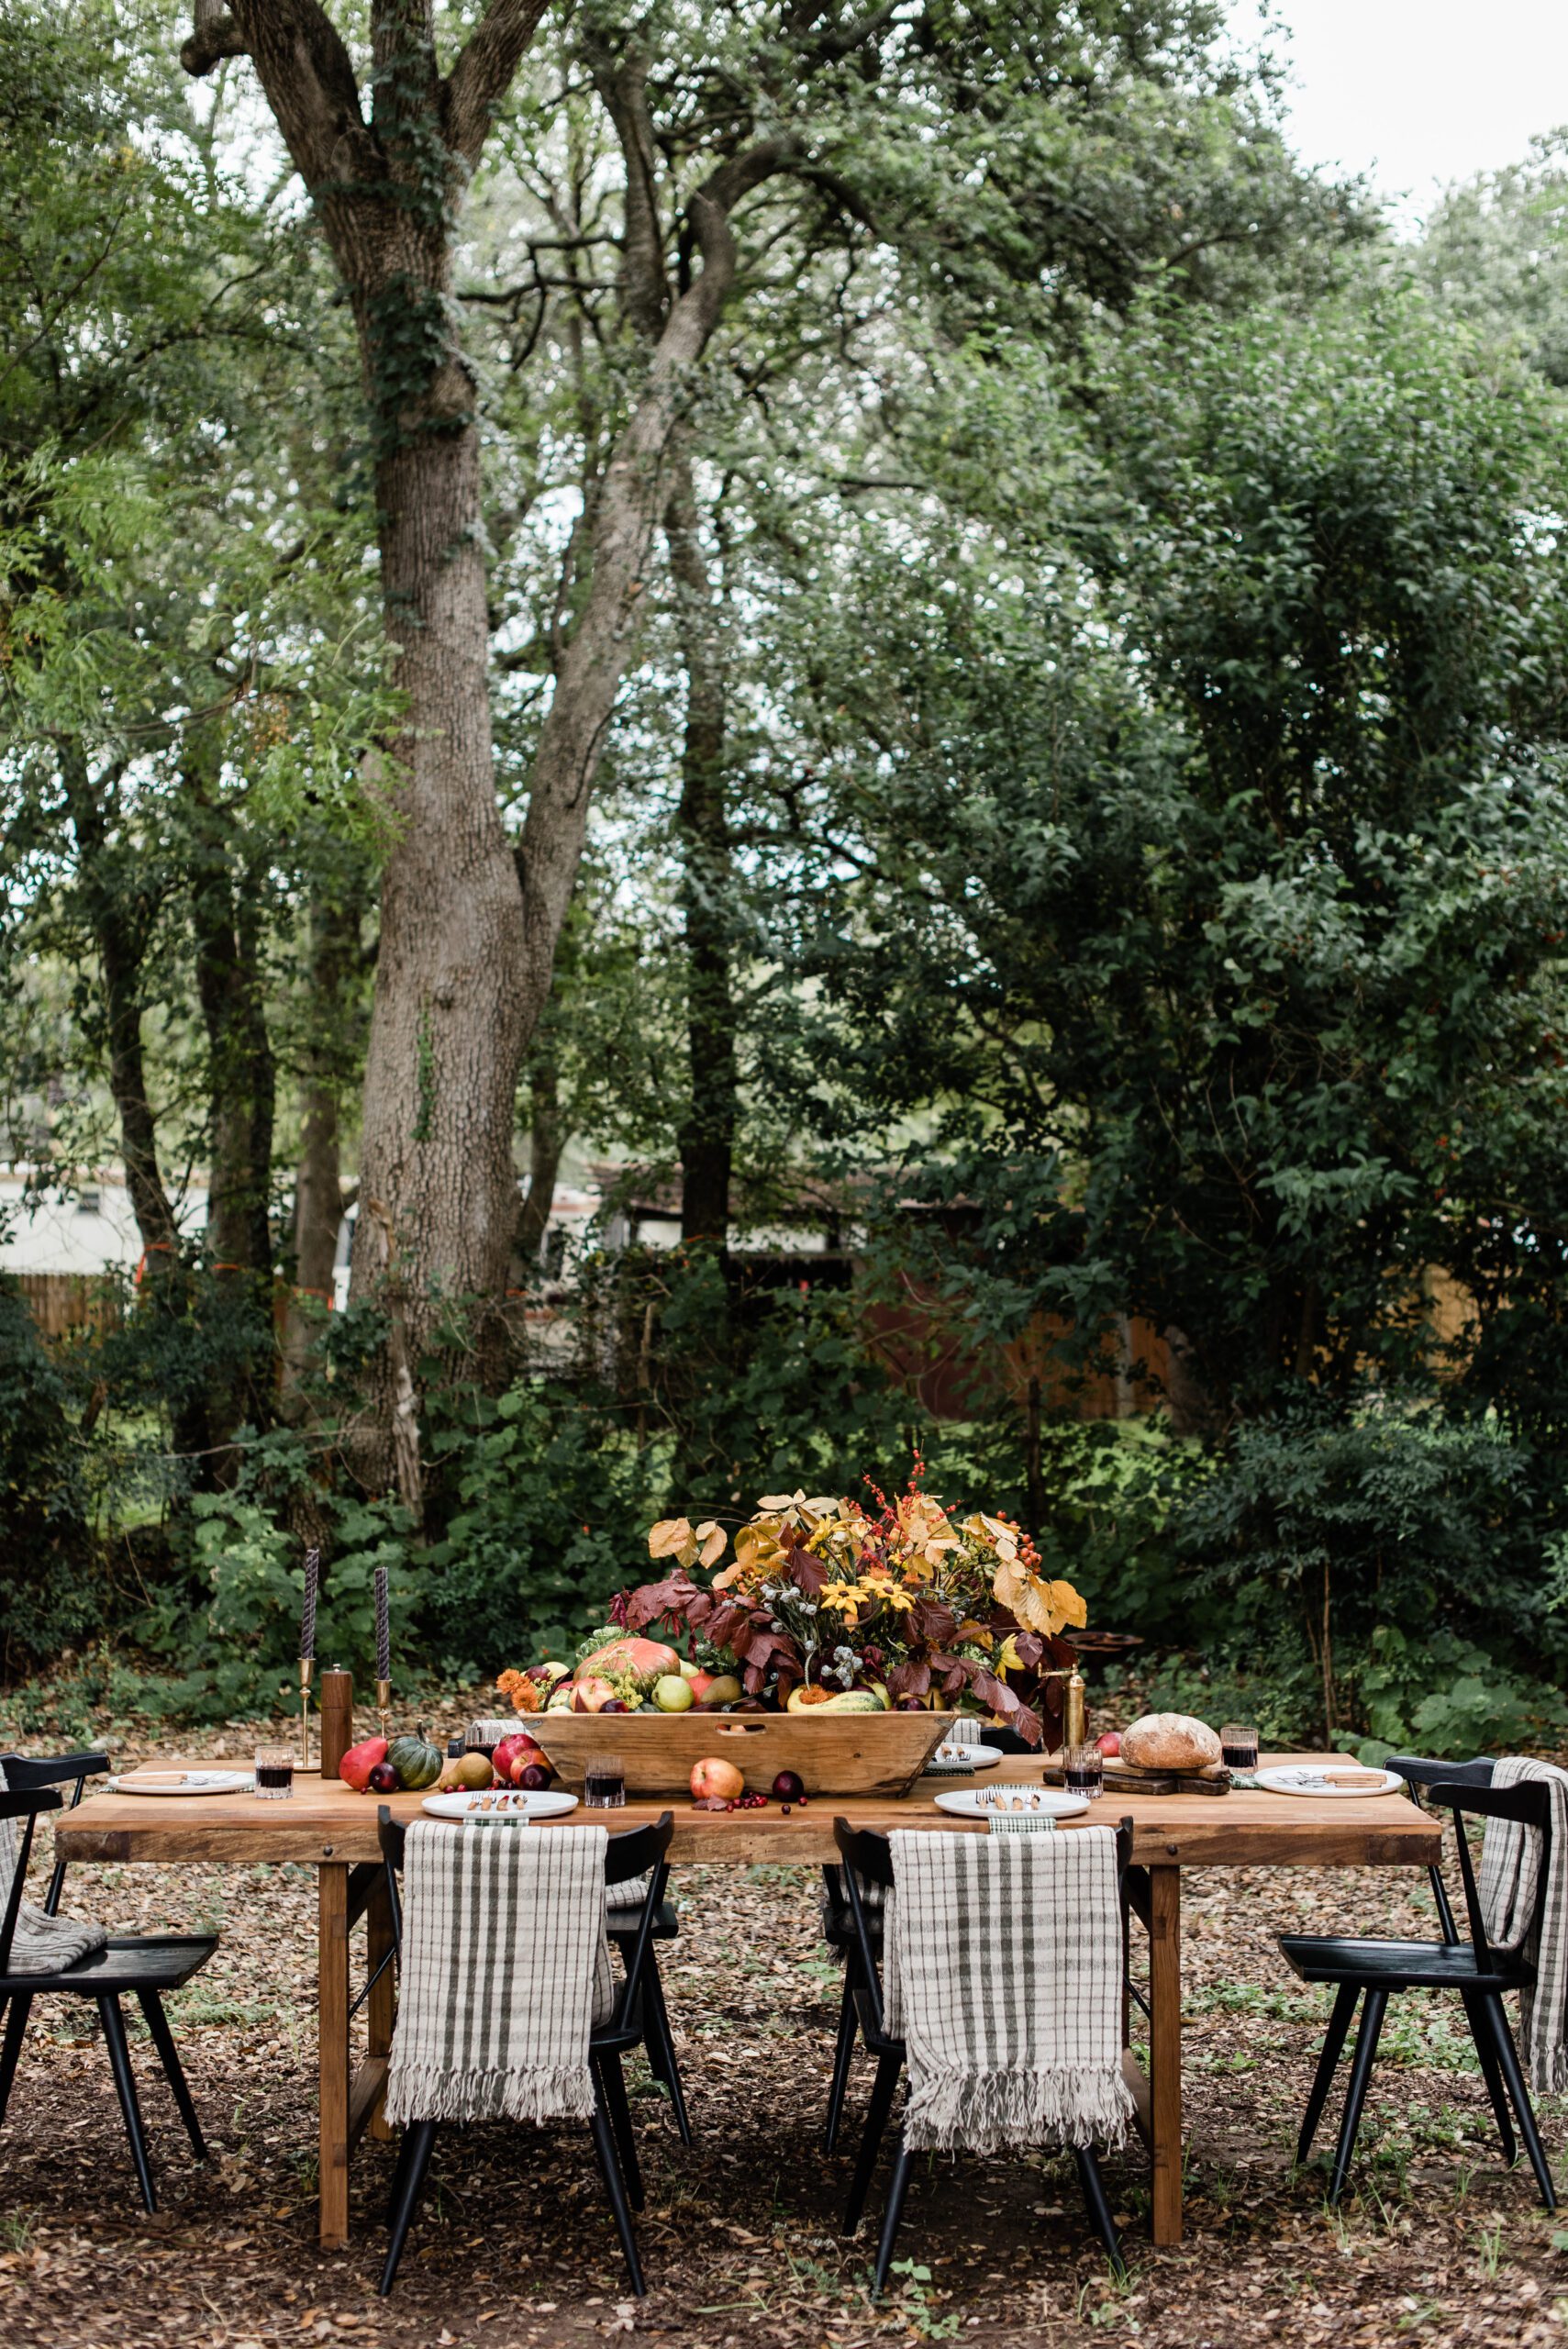 autumn harvest table decor with plaid blankets draped over each seat